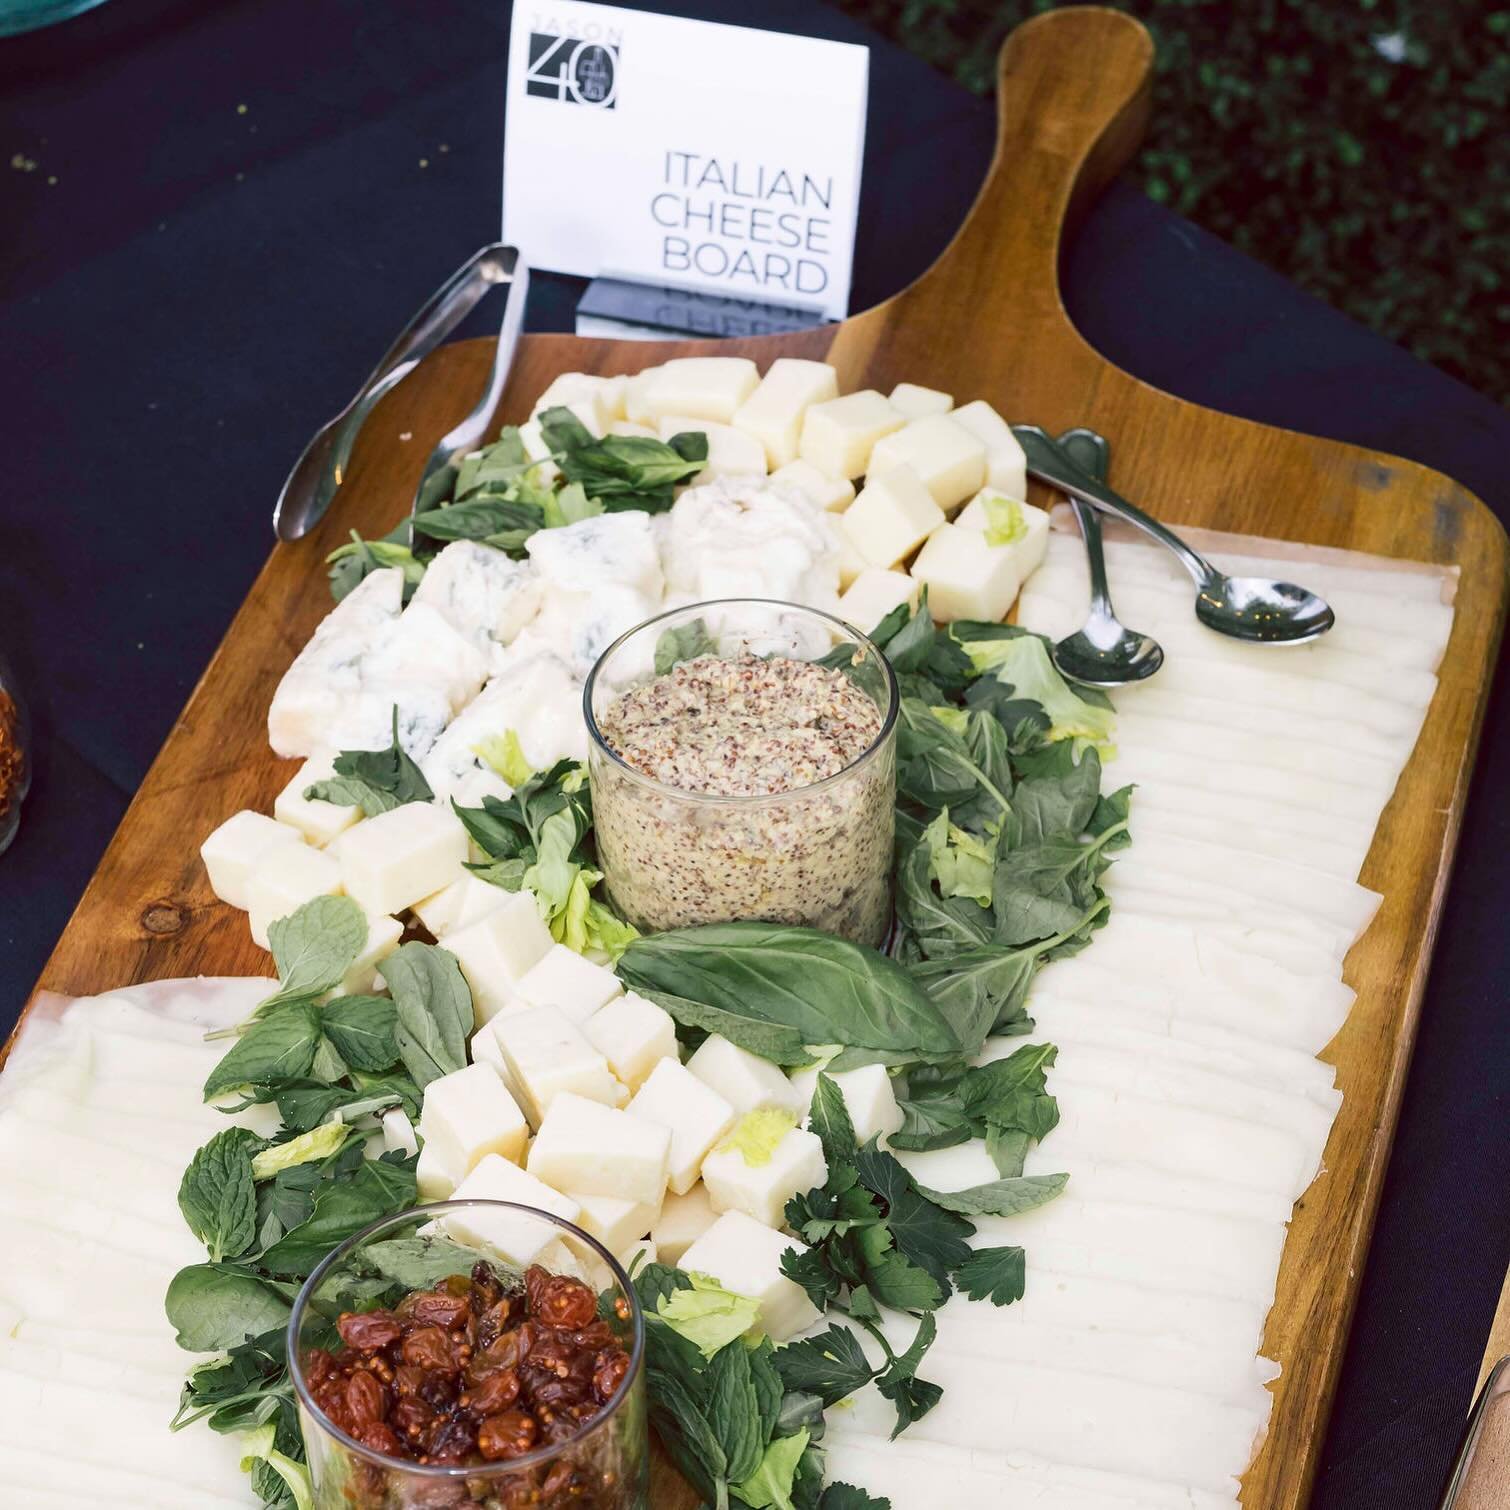 Delicious cheese board by @oliveandjuneatx #atxeventplanner #austineventplanner #atx #atxevents